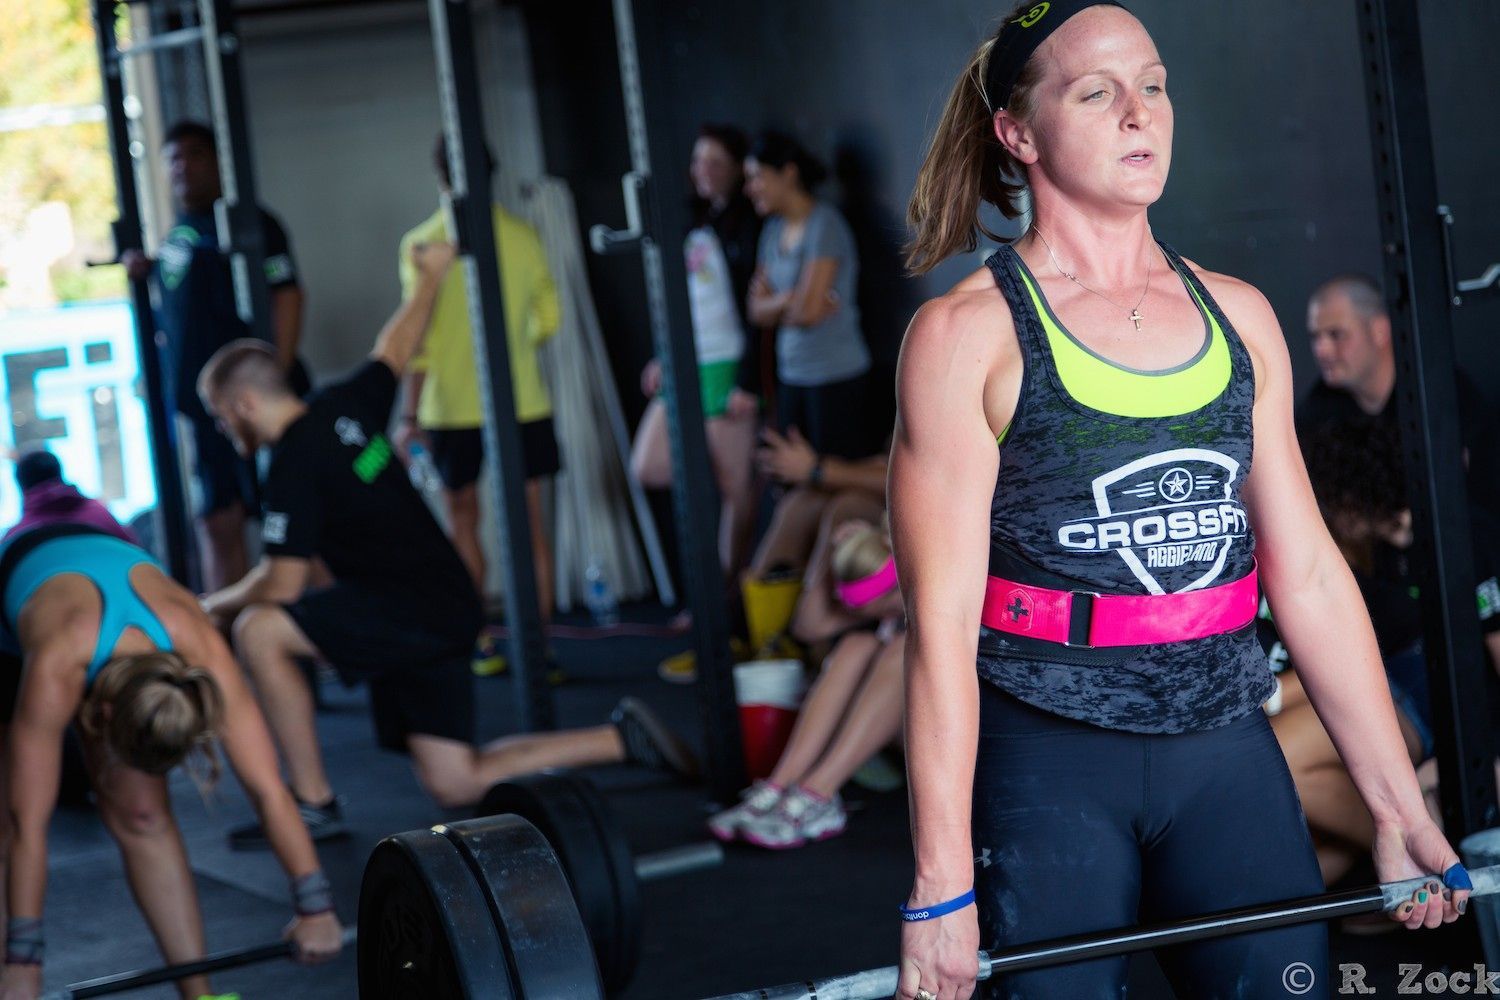 Normal At CrossFit, Totally Inappropriate For Life -   5 fitness Humor inappropriate ideas